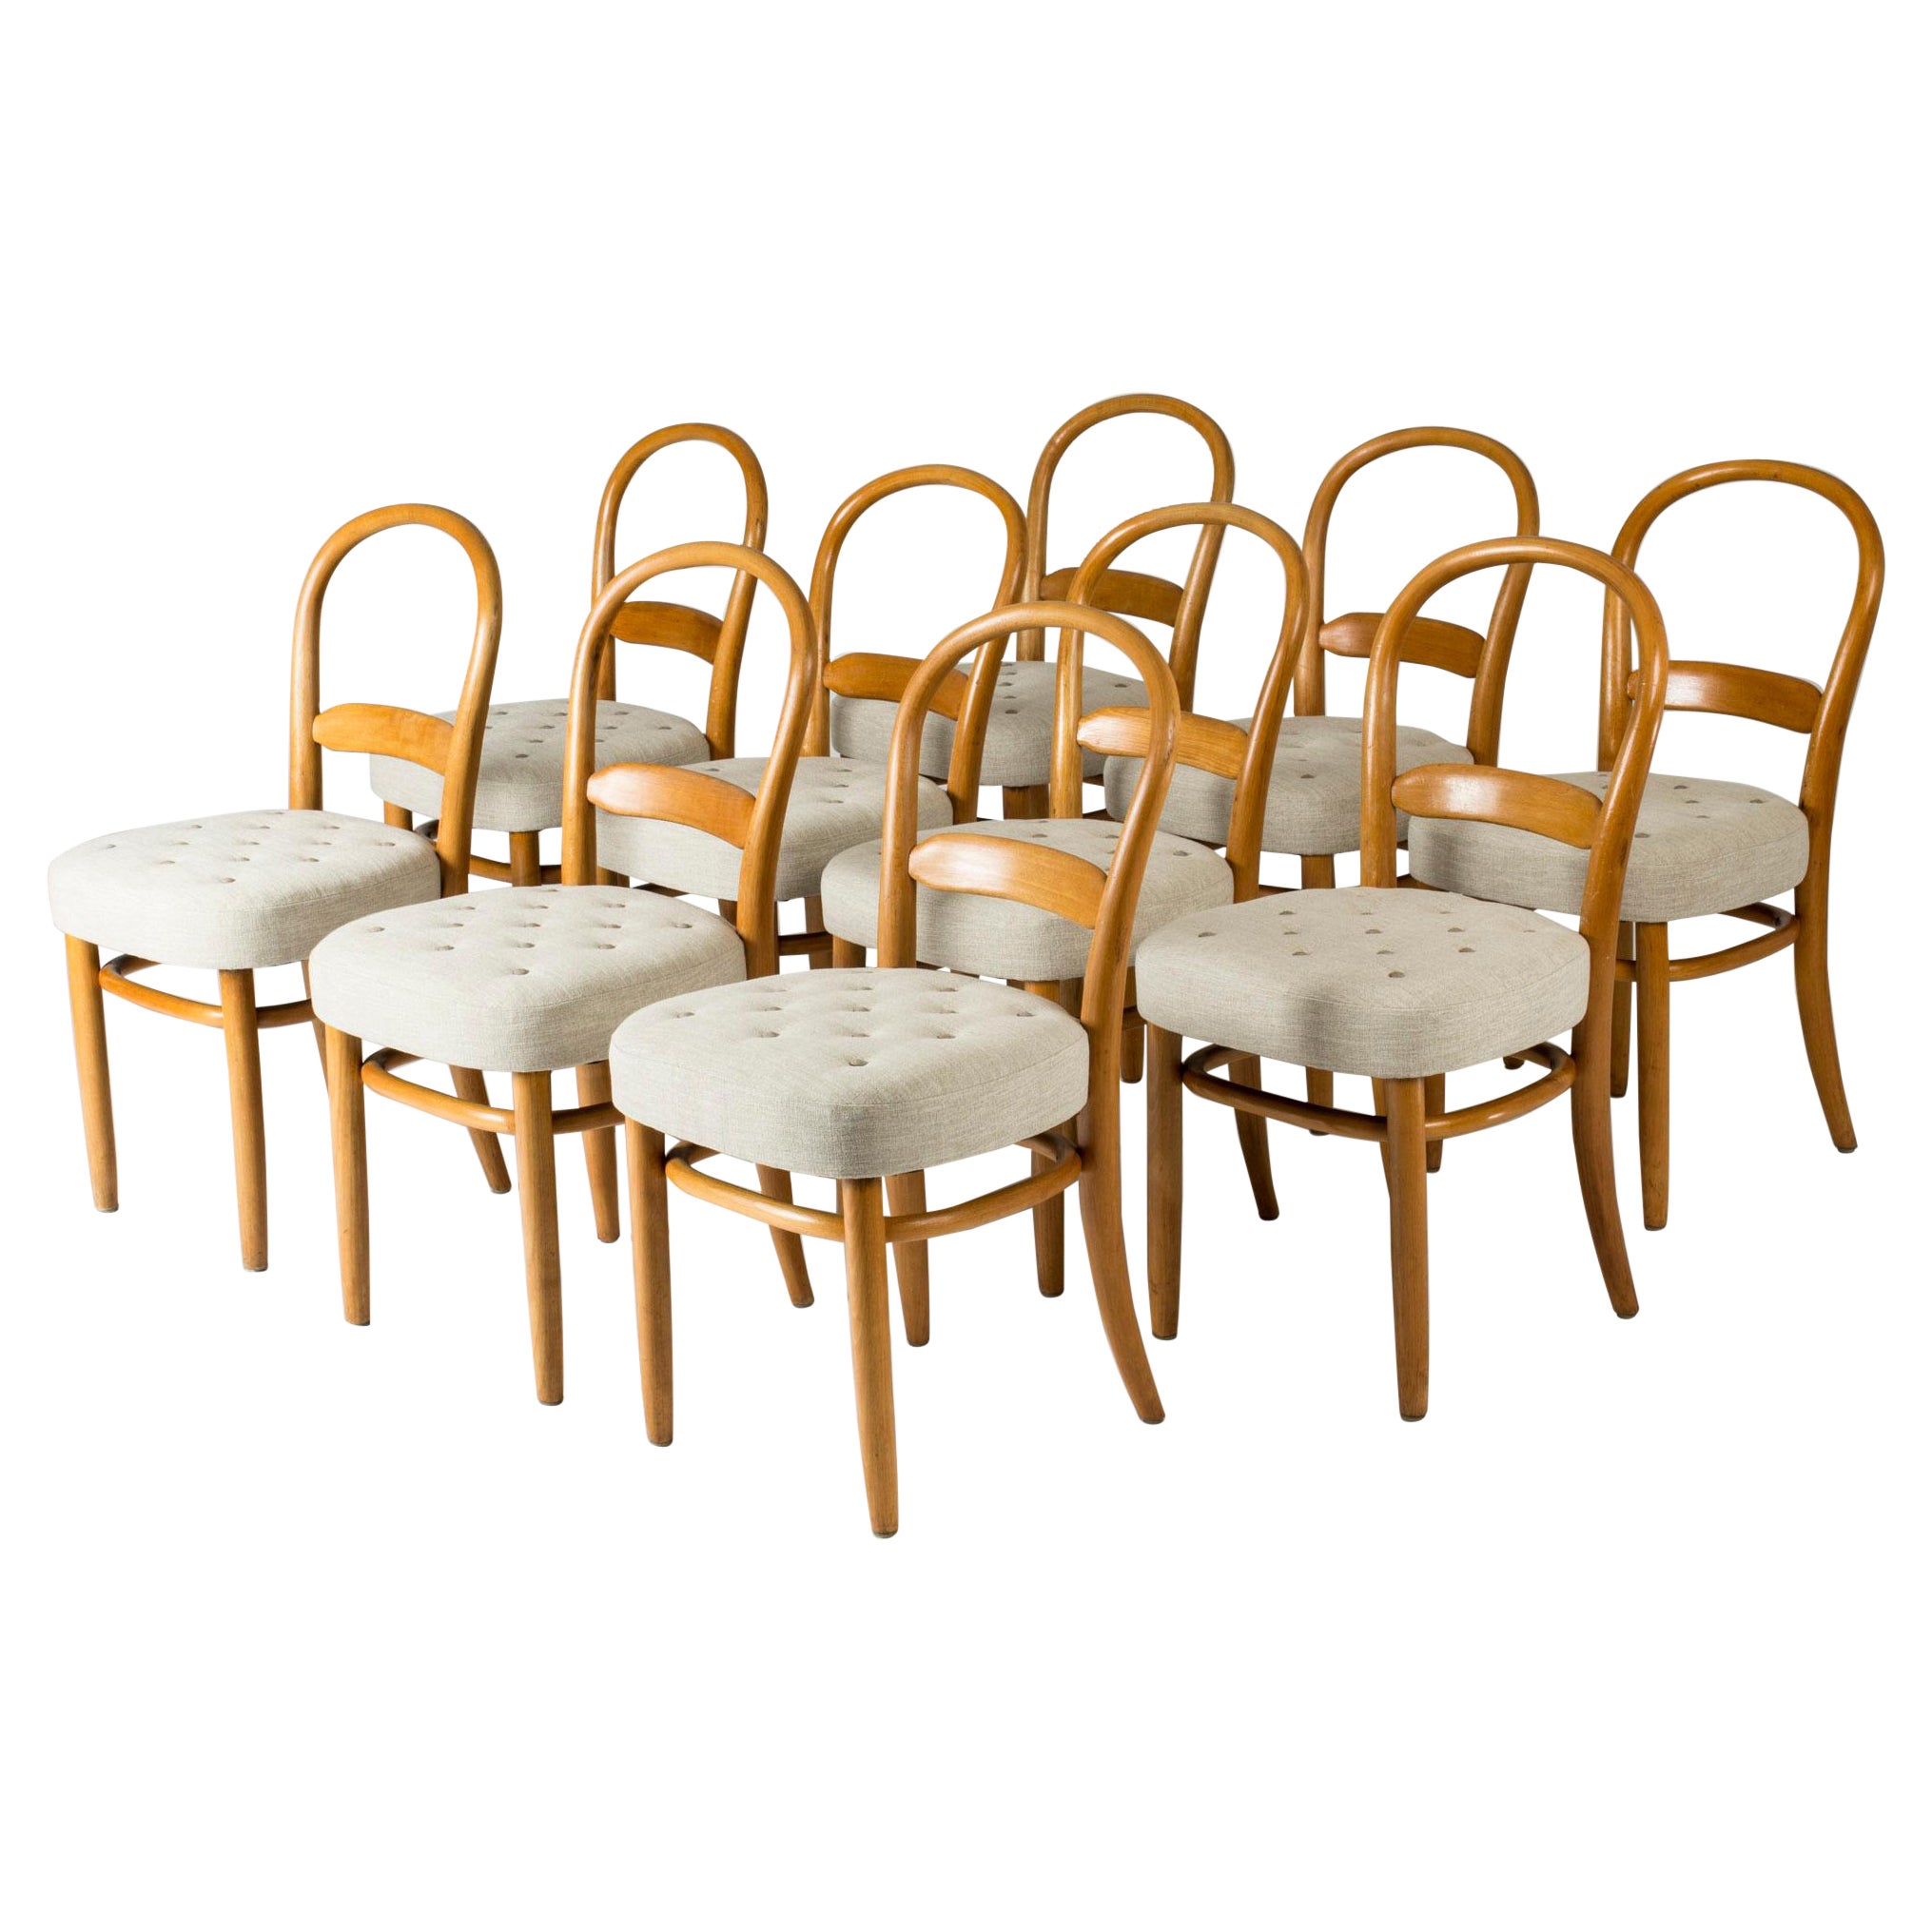 Set of Ten Dining Chairs by Carl-Axel Acking, Sweden, 1937